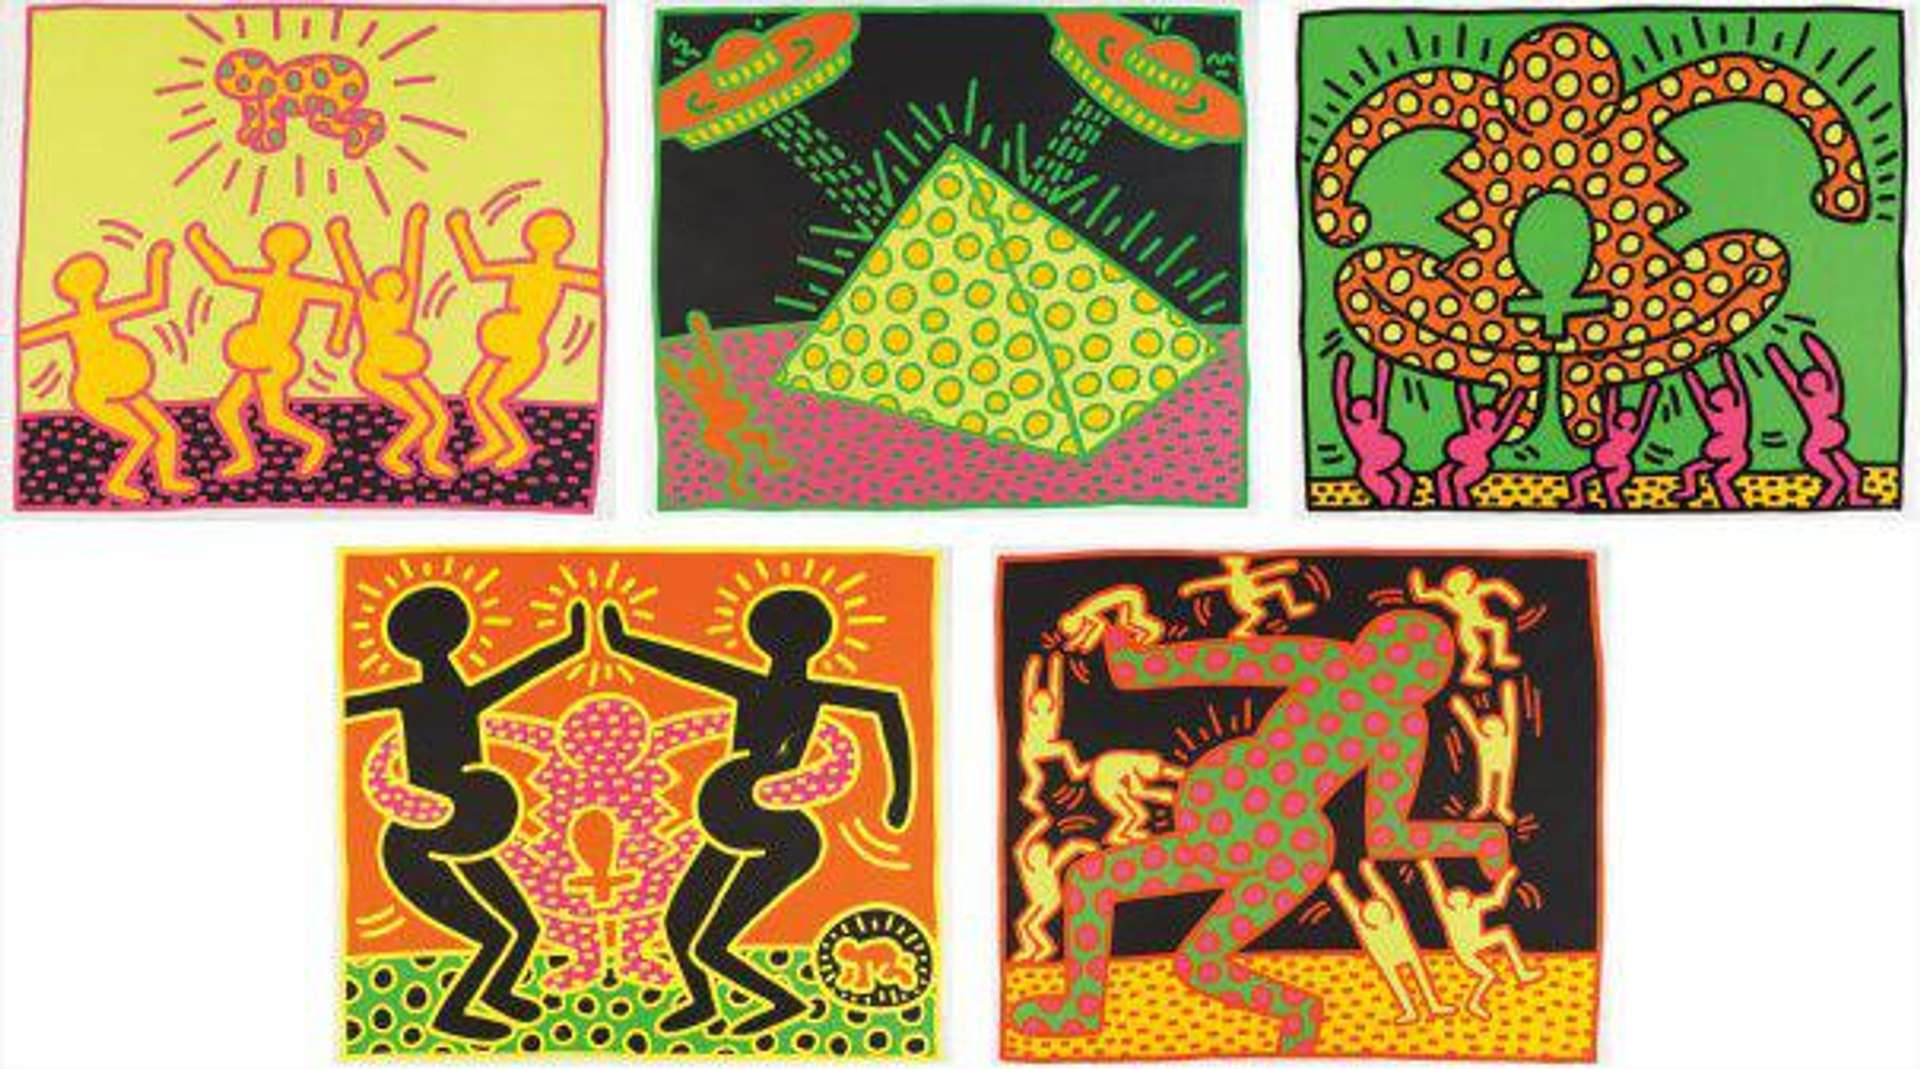 Fertility Suite (complete set) - Signed Print by Keith Haring 1983 - MyArtBroker